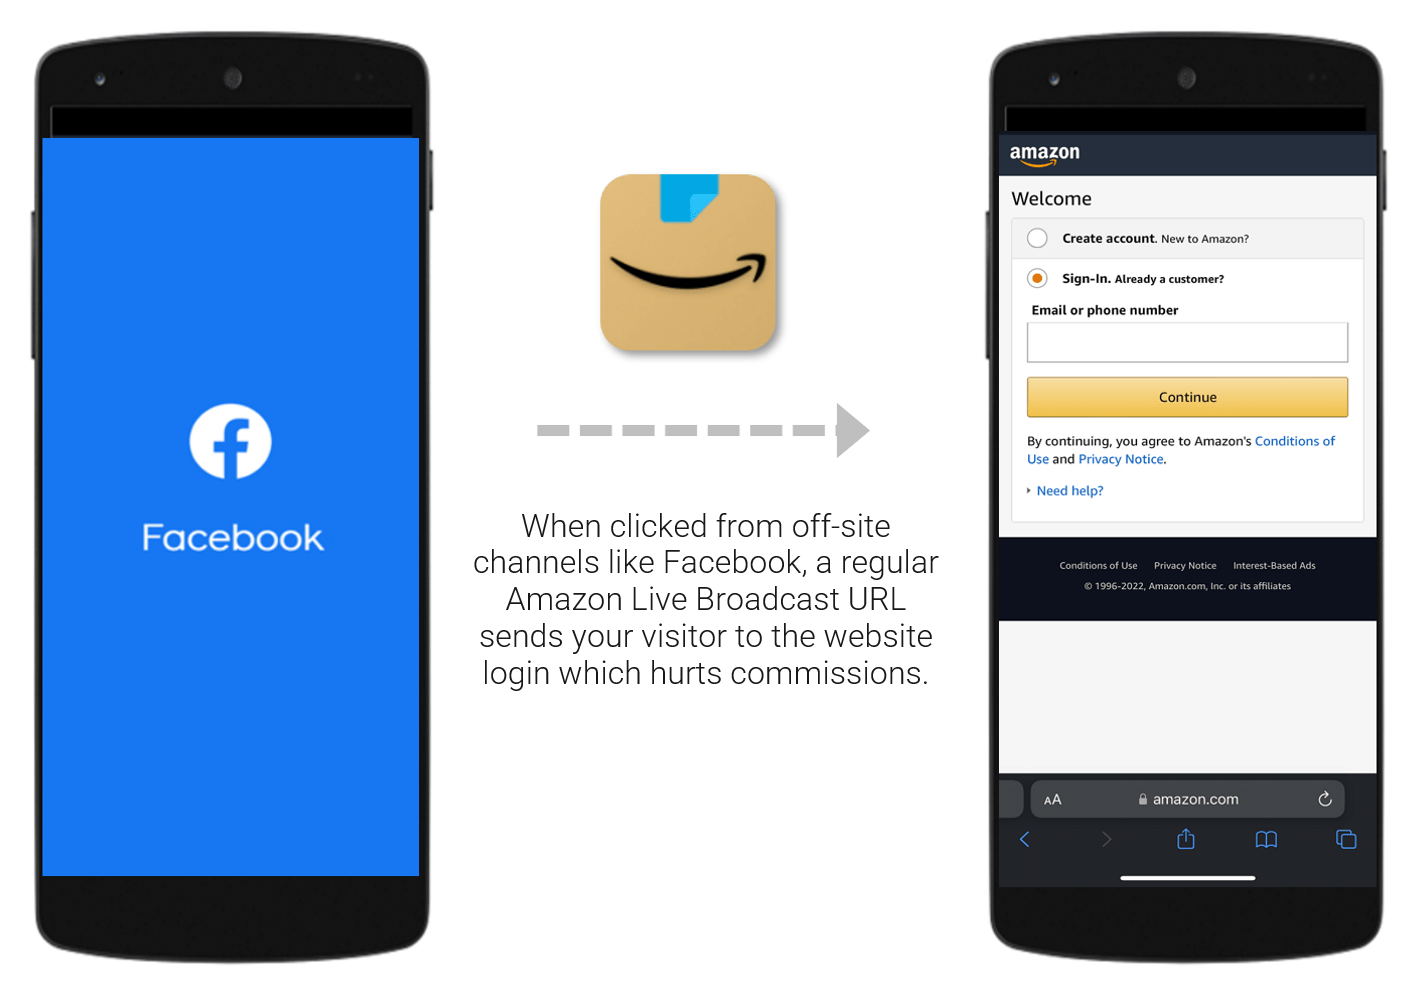 When clicked from off-site channels like Facebook, a regular Amazon Live Broadcast URL sends your visitor to the website login which hurts commissions